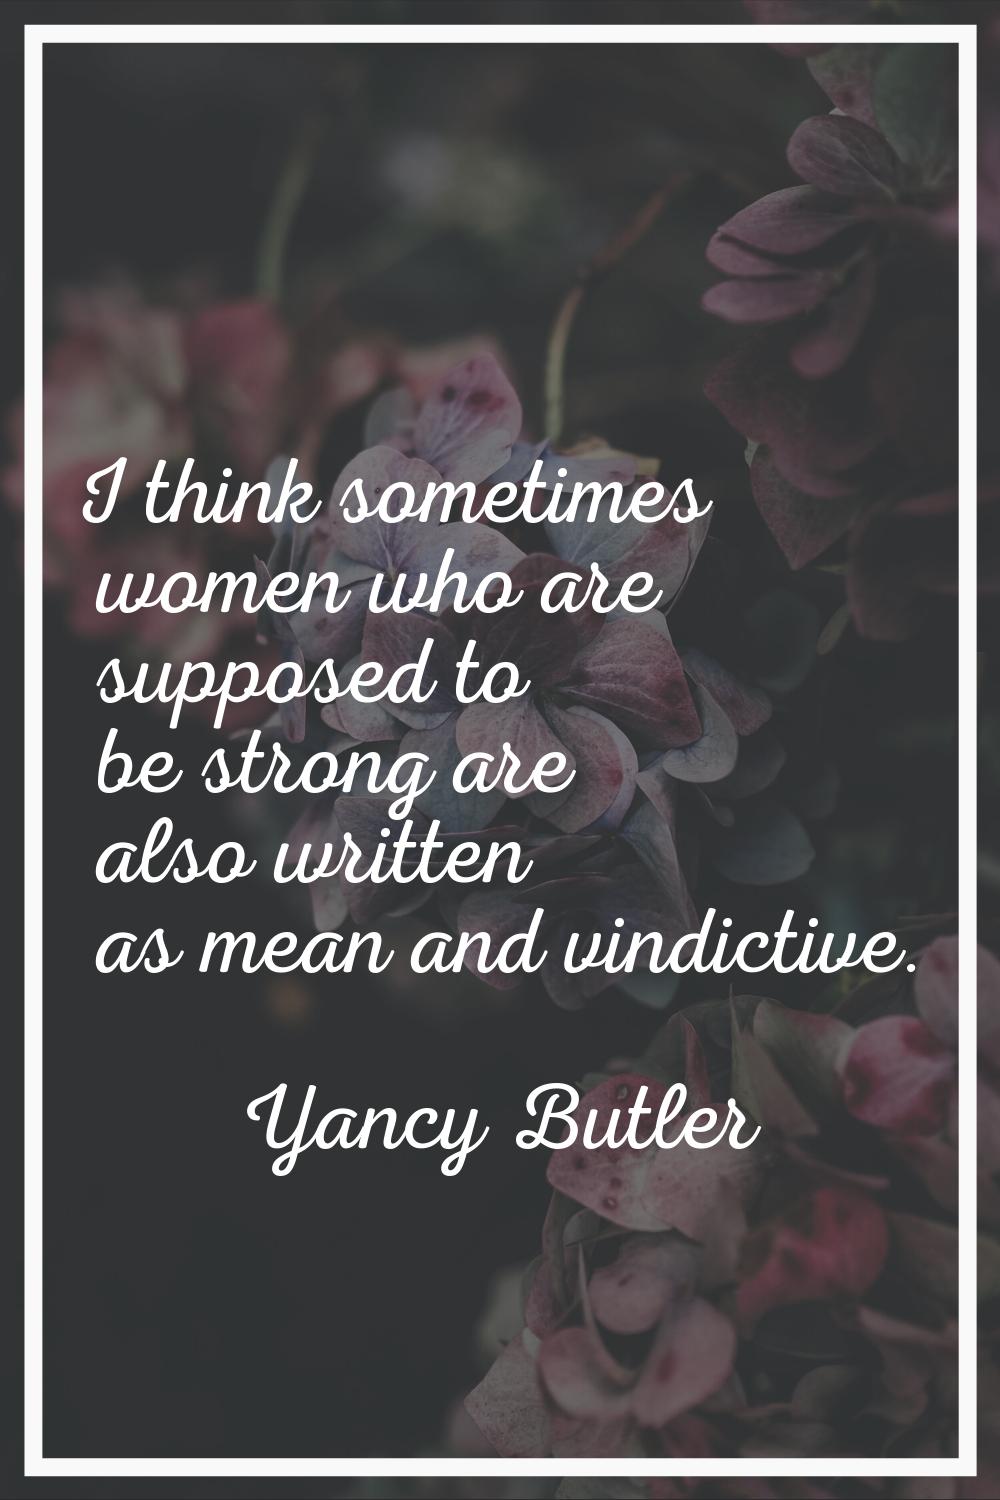 I think sometimes women who are supposed to be strong are also written as mean and vindictive.